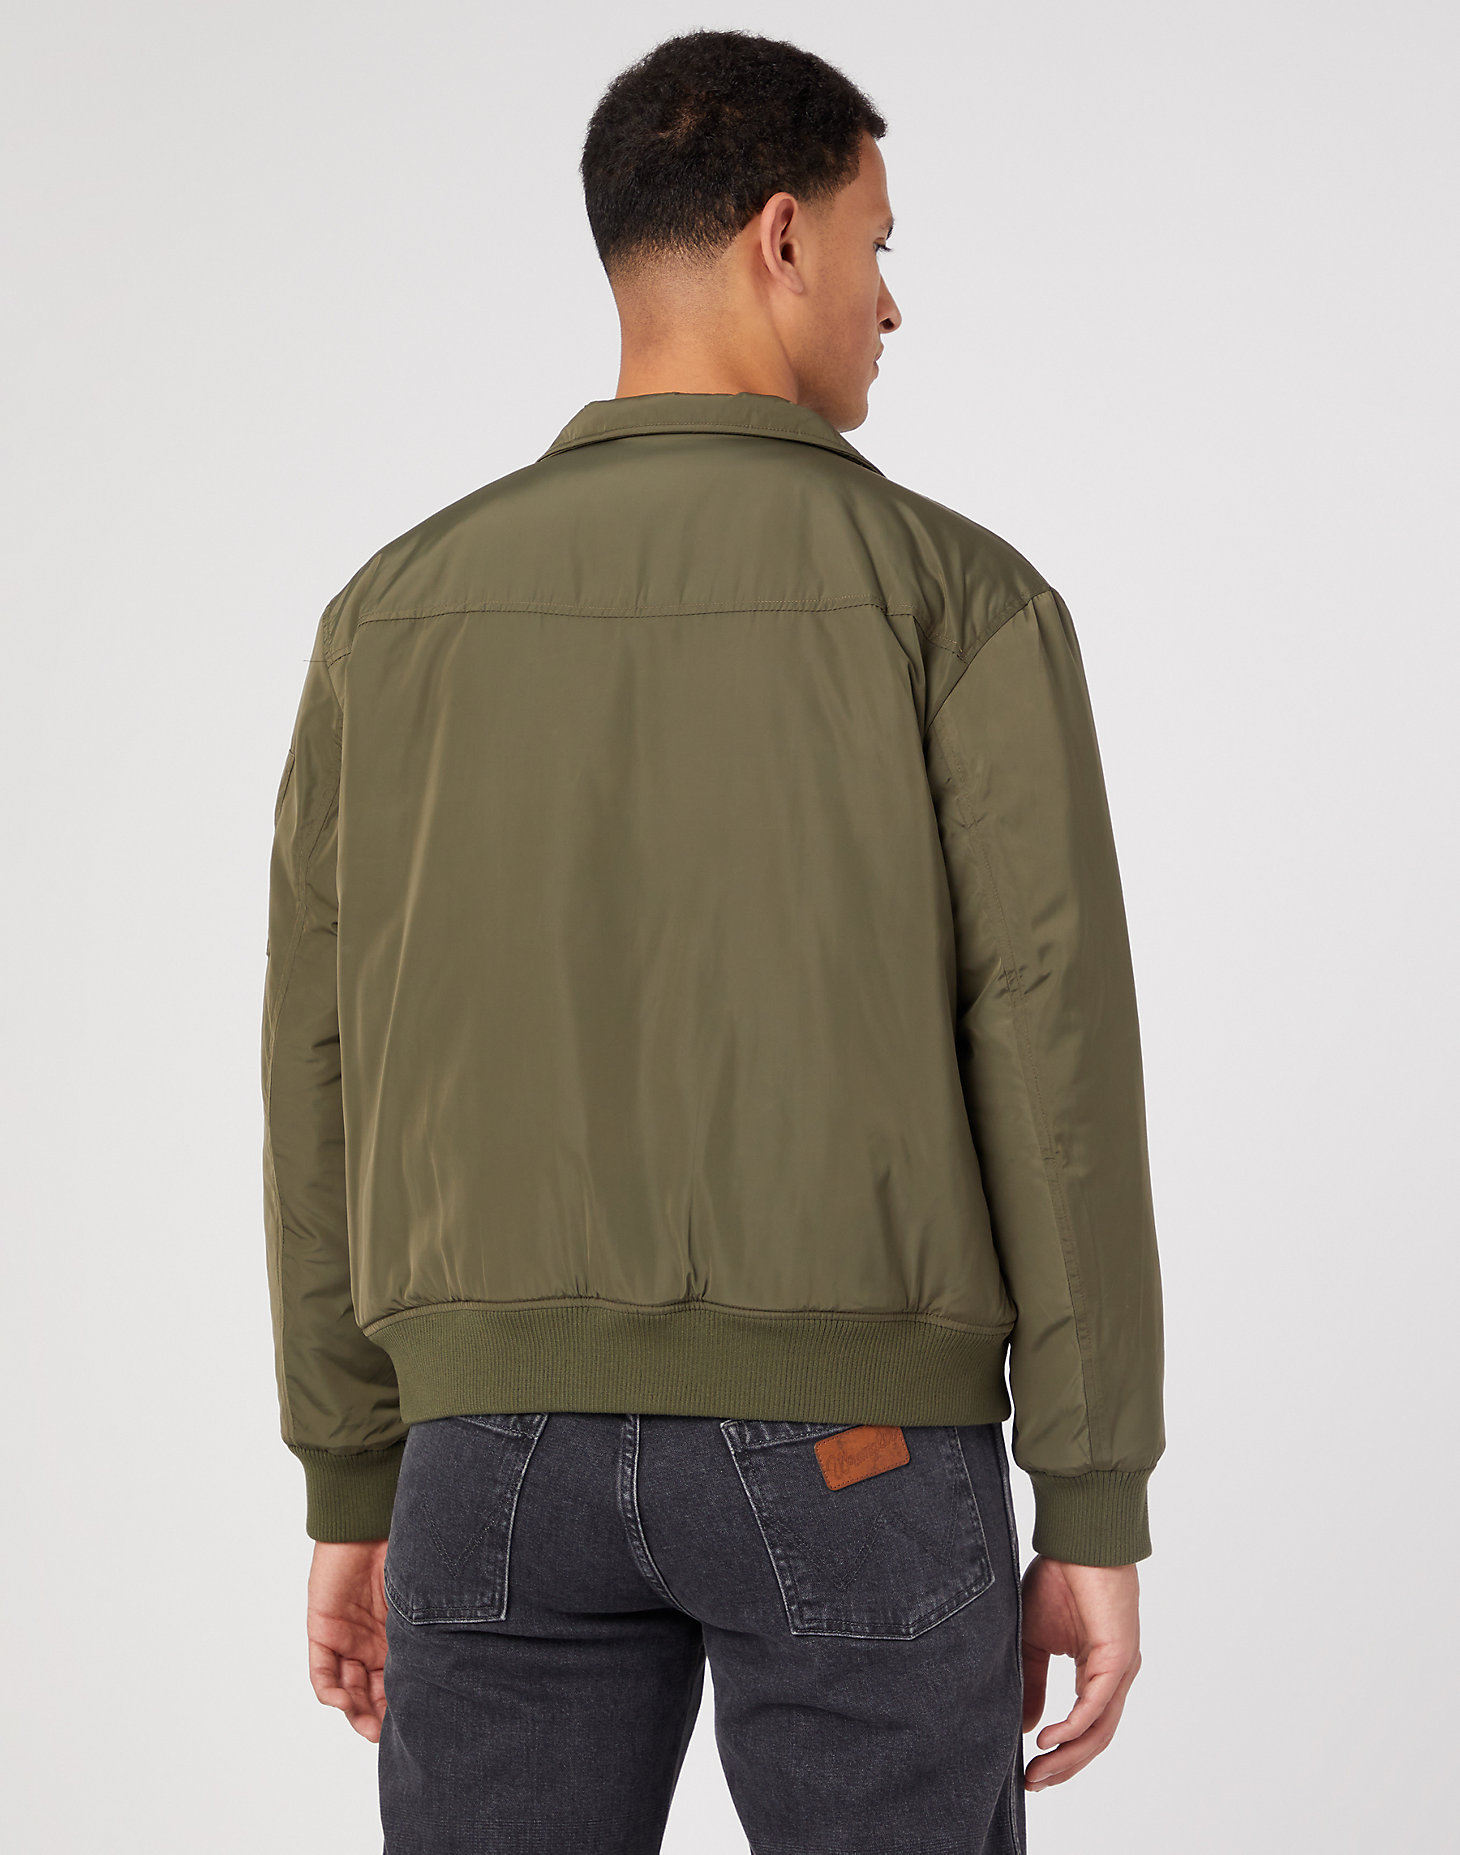 Bomber Jacket in Militare Green alternative view 2